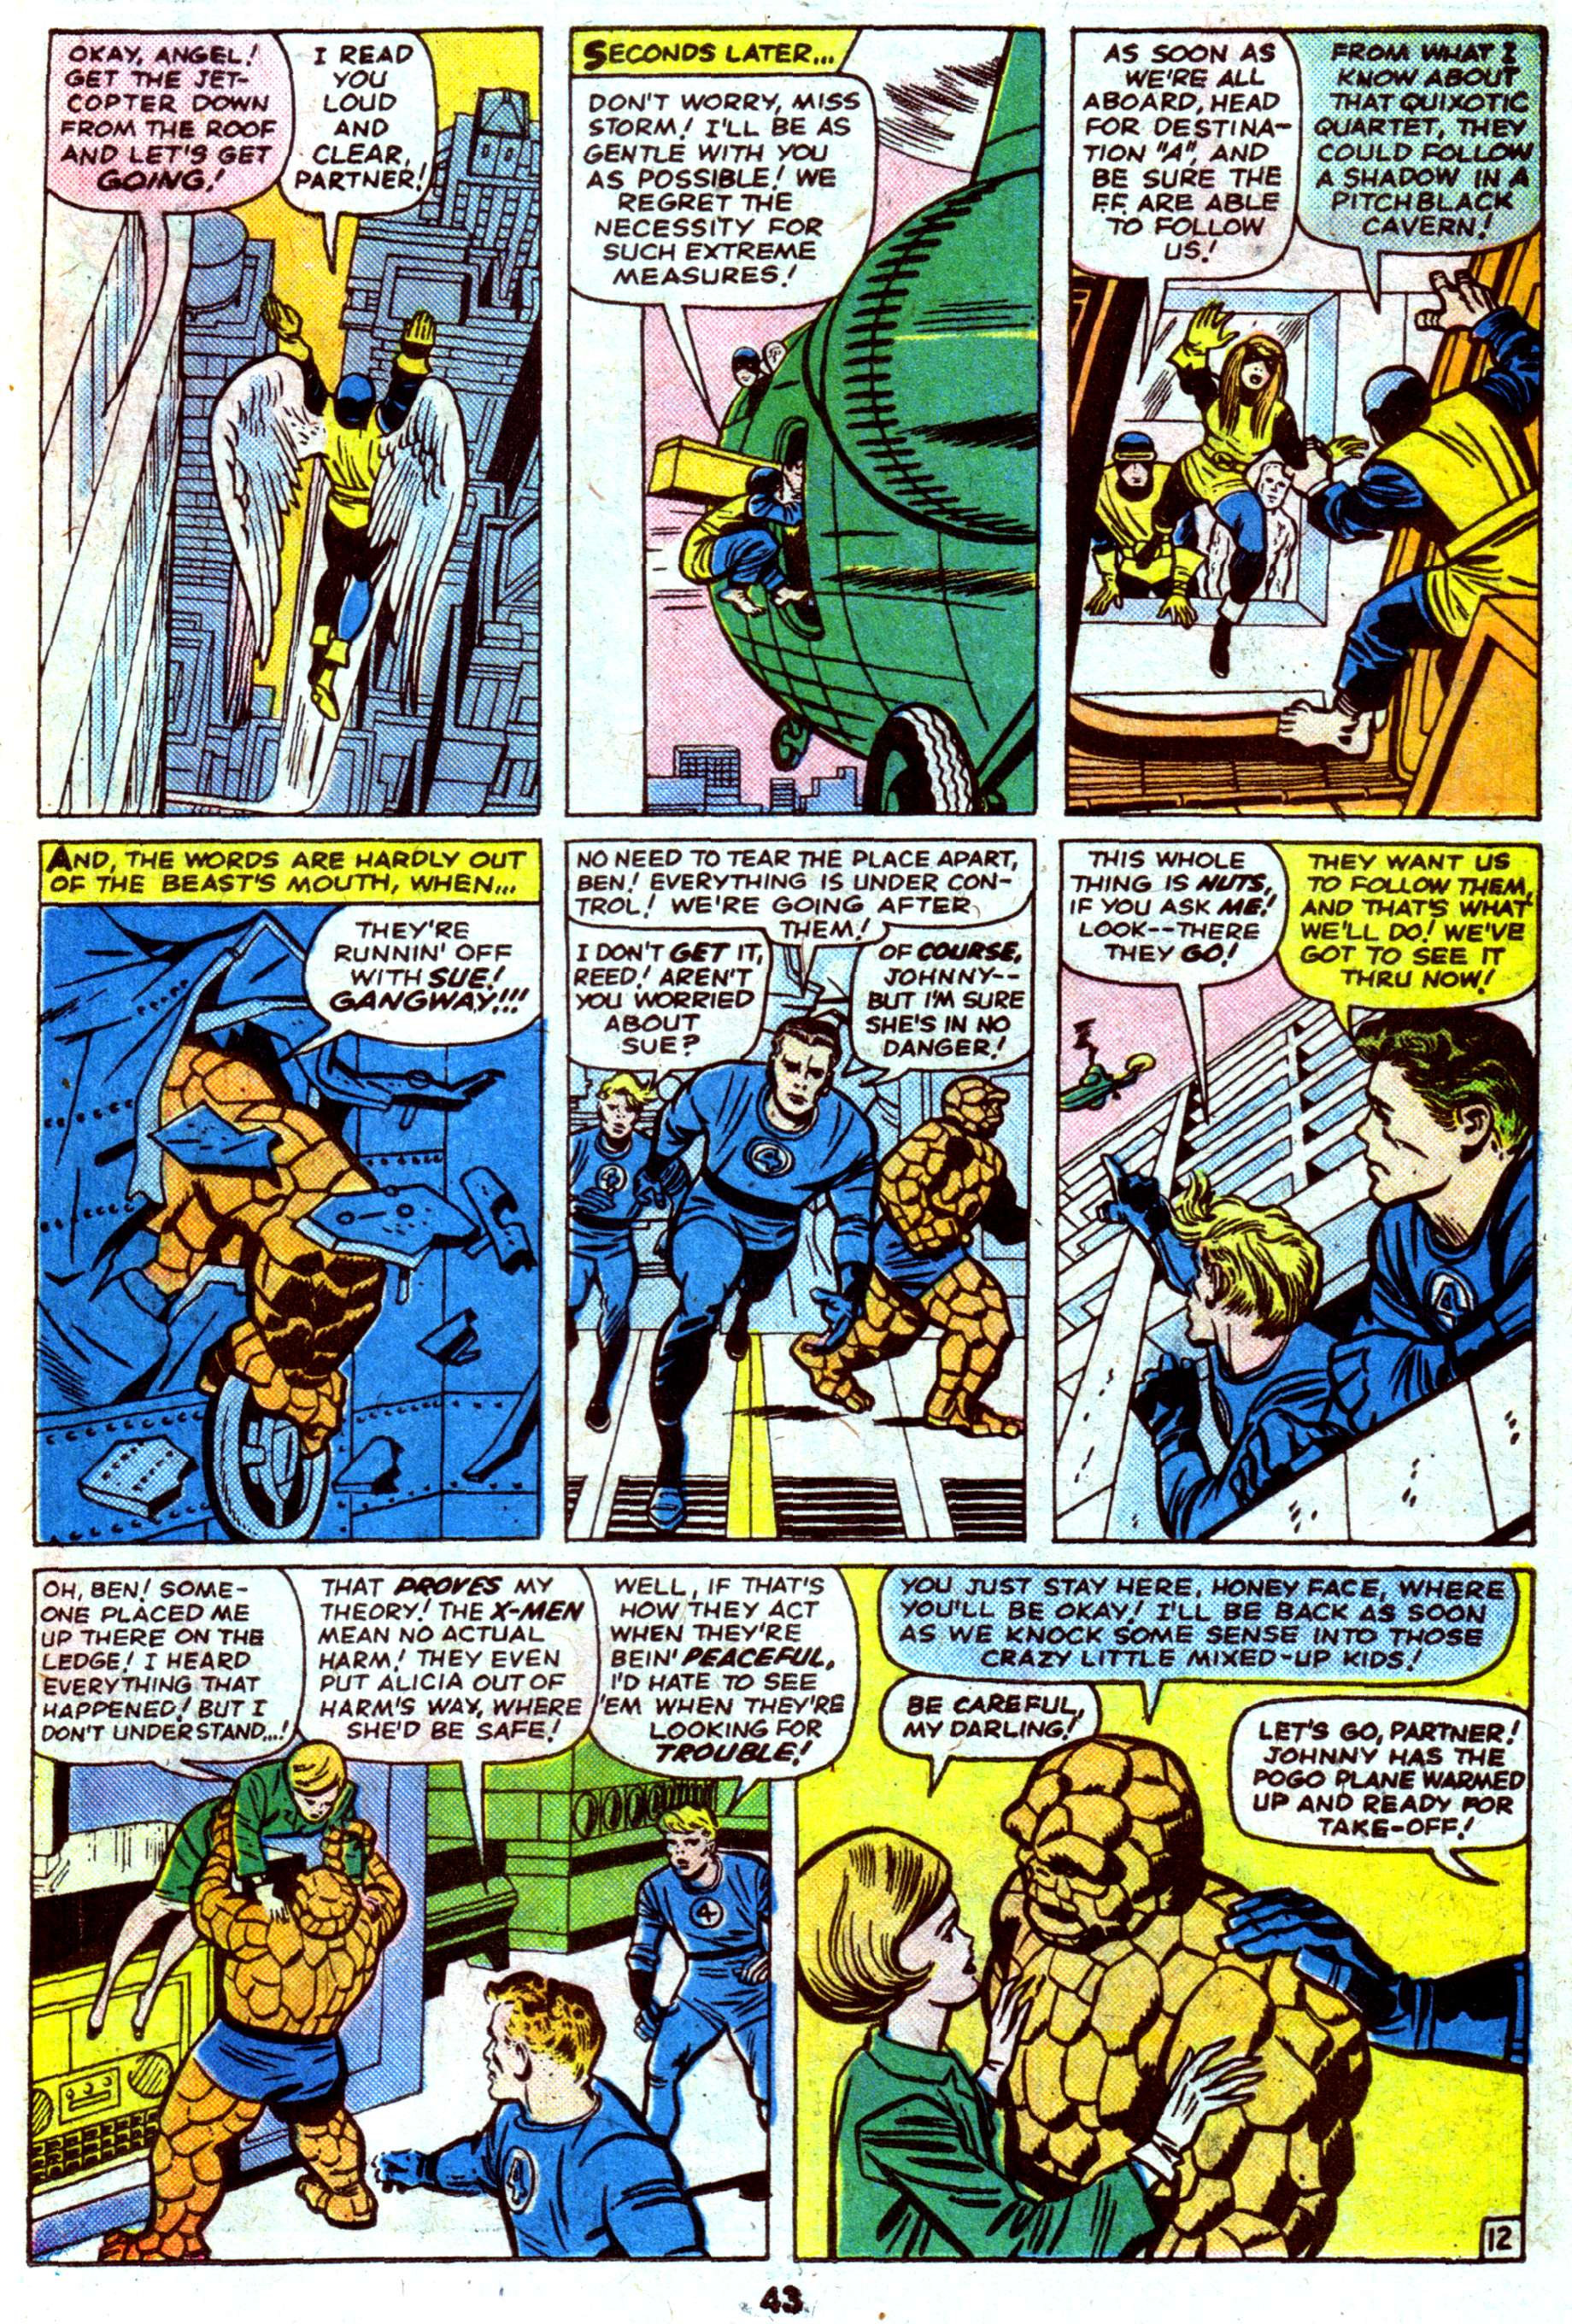 Read online Giant-Size Fantastic Four comic -  Issue #4 - 45